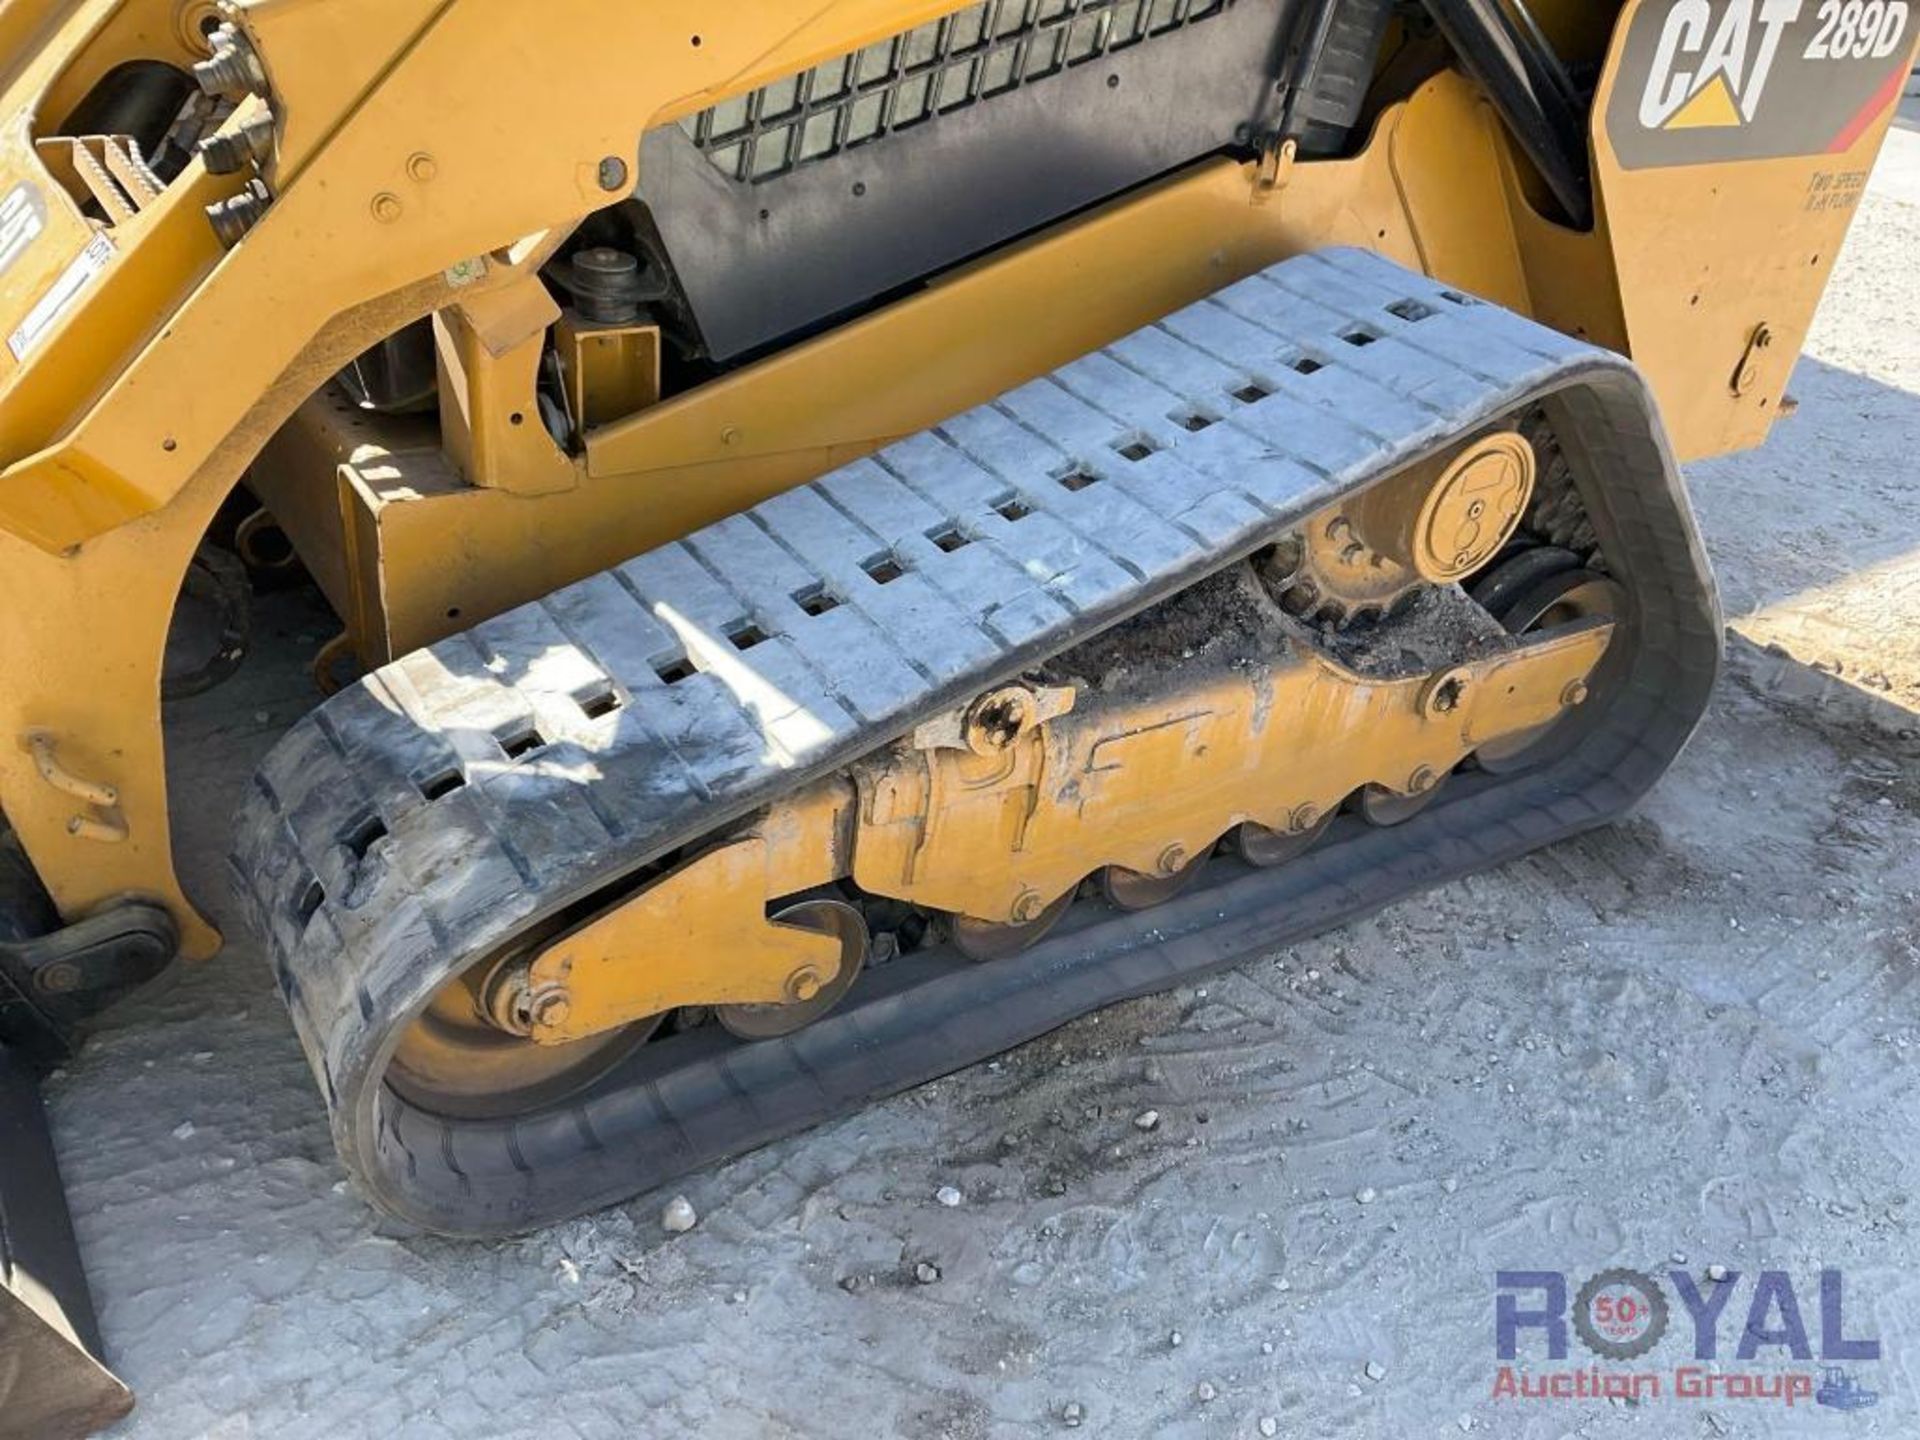 2018 Caterpillar 289D Compact Track Loader Skid Steer - Image 22 of 23